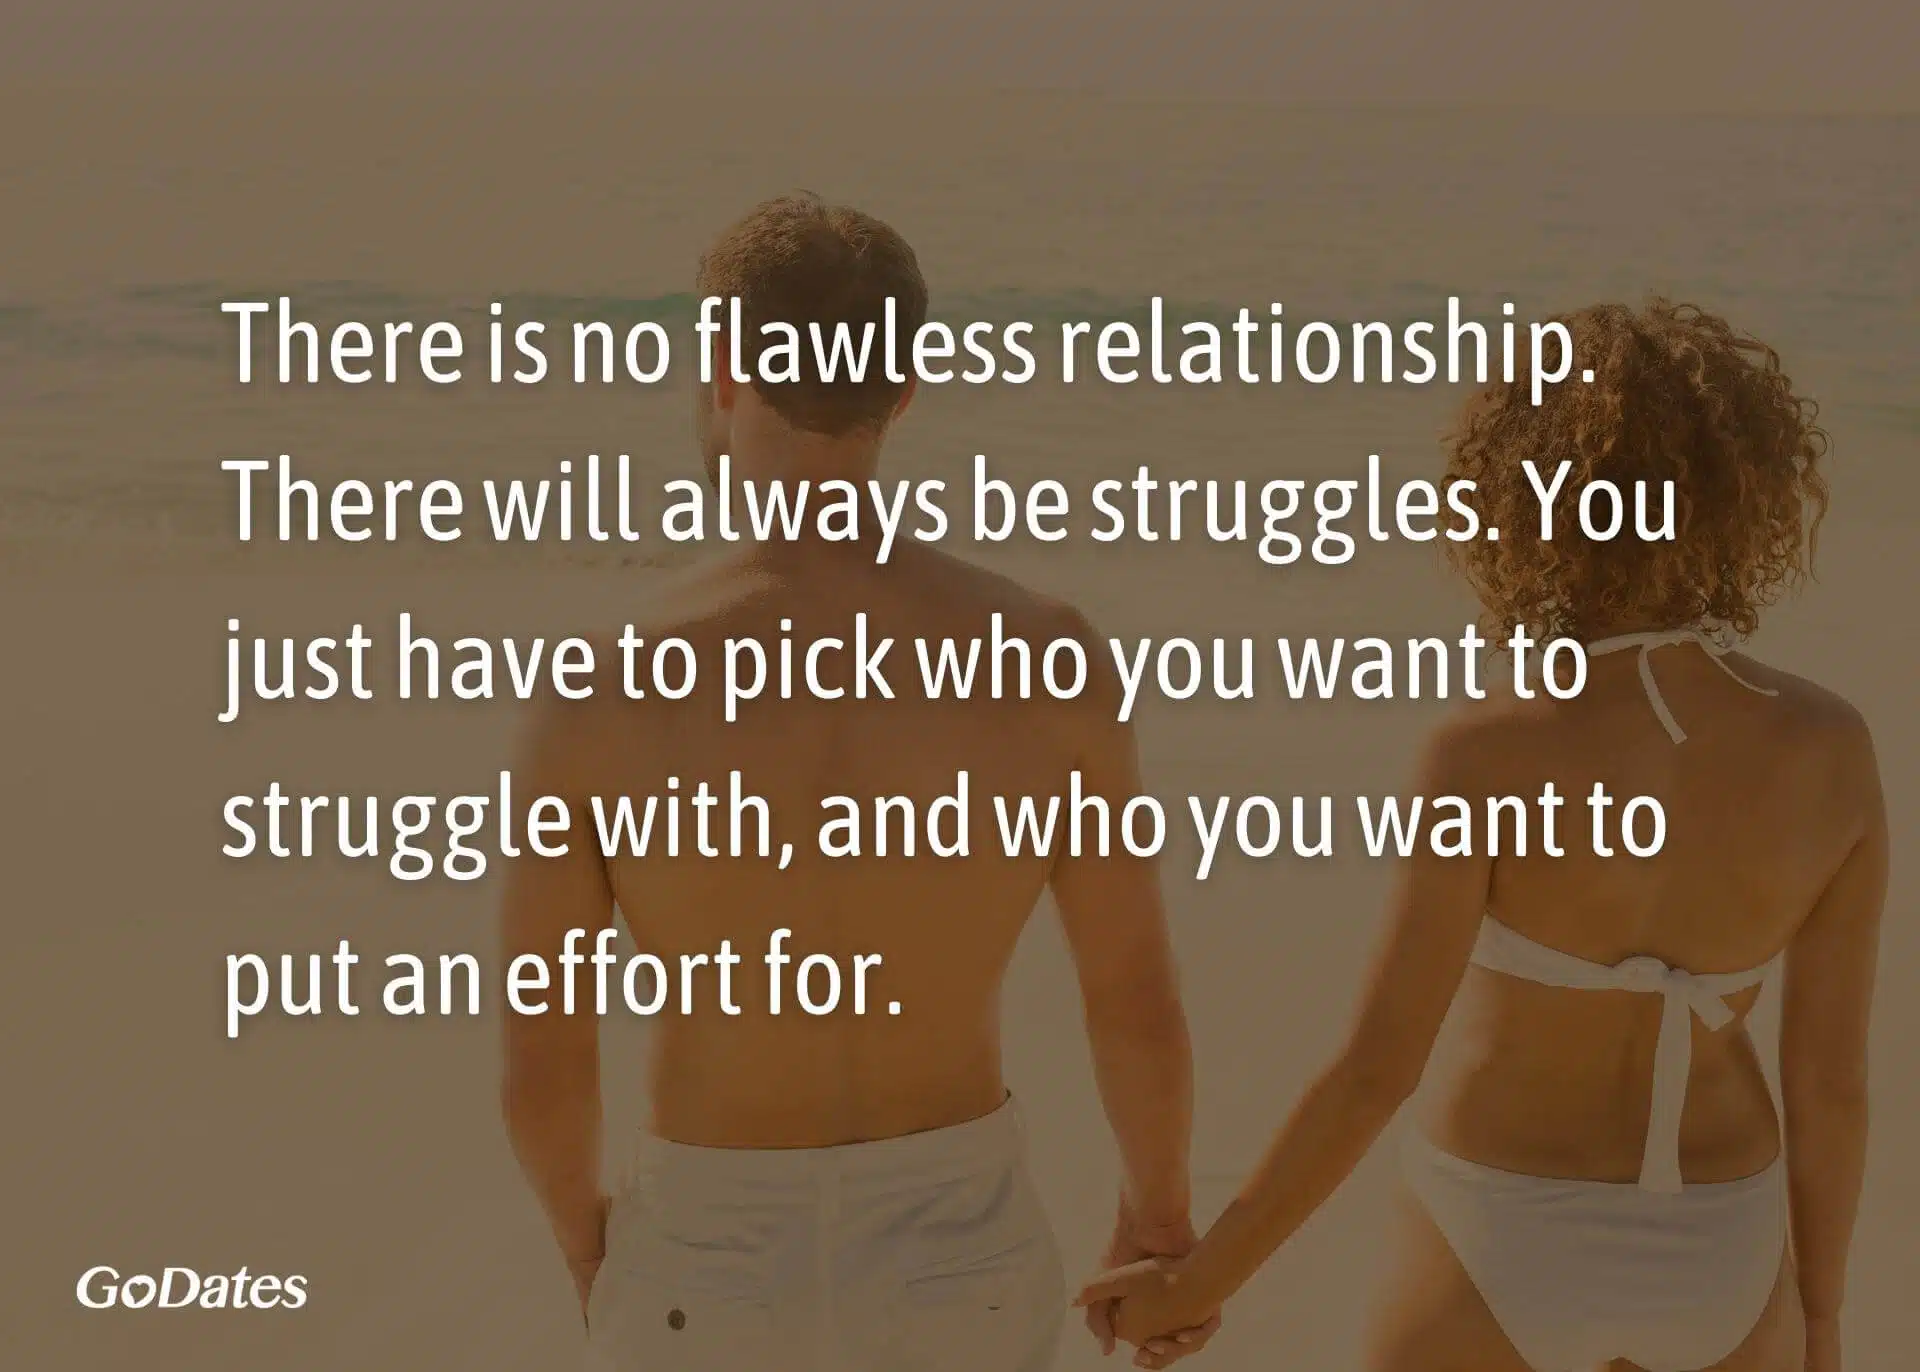 There is no flawless relationship quote